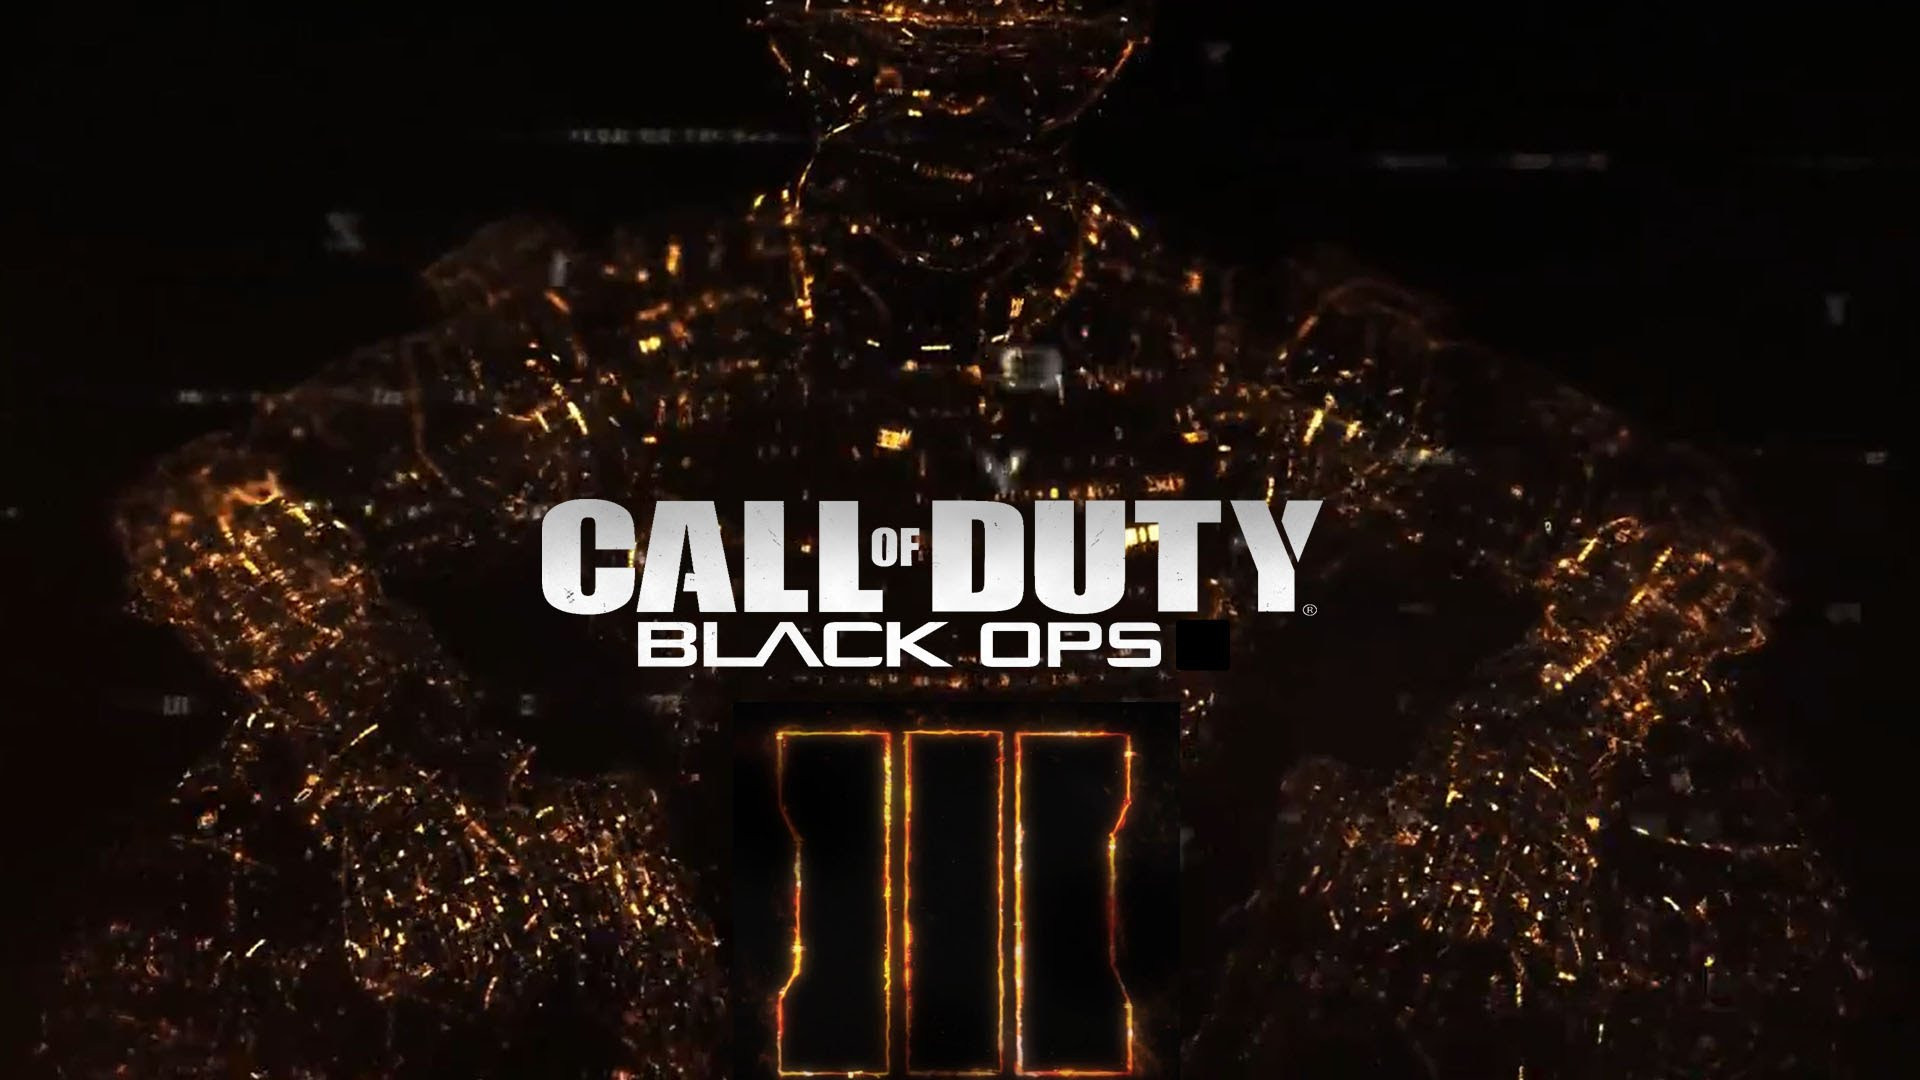 1920x1080 Black Ops 4 Wallpaper Hd Awesome Call Of Duty Black Ops Iii Wallpapers